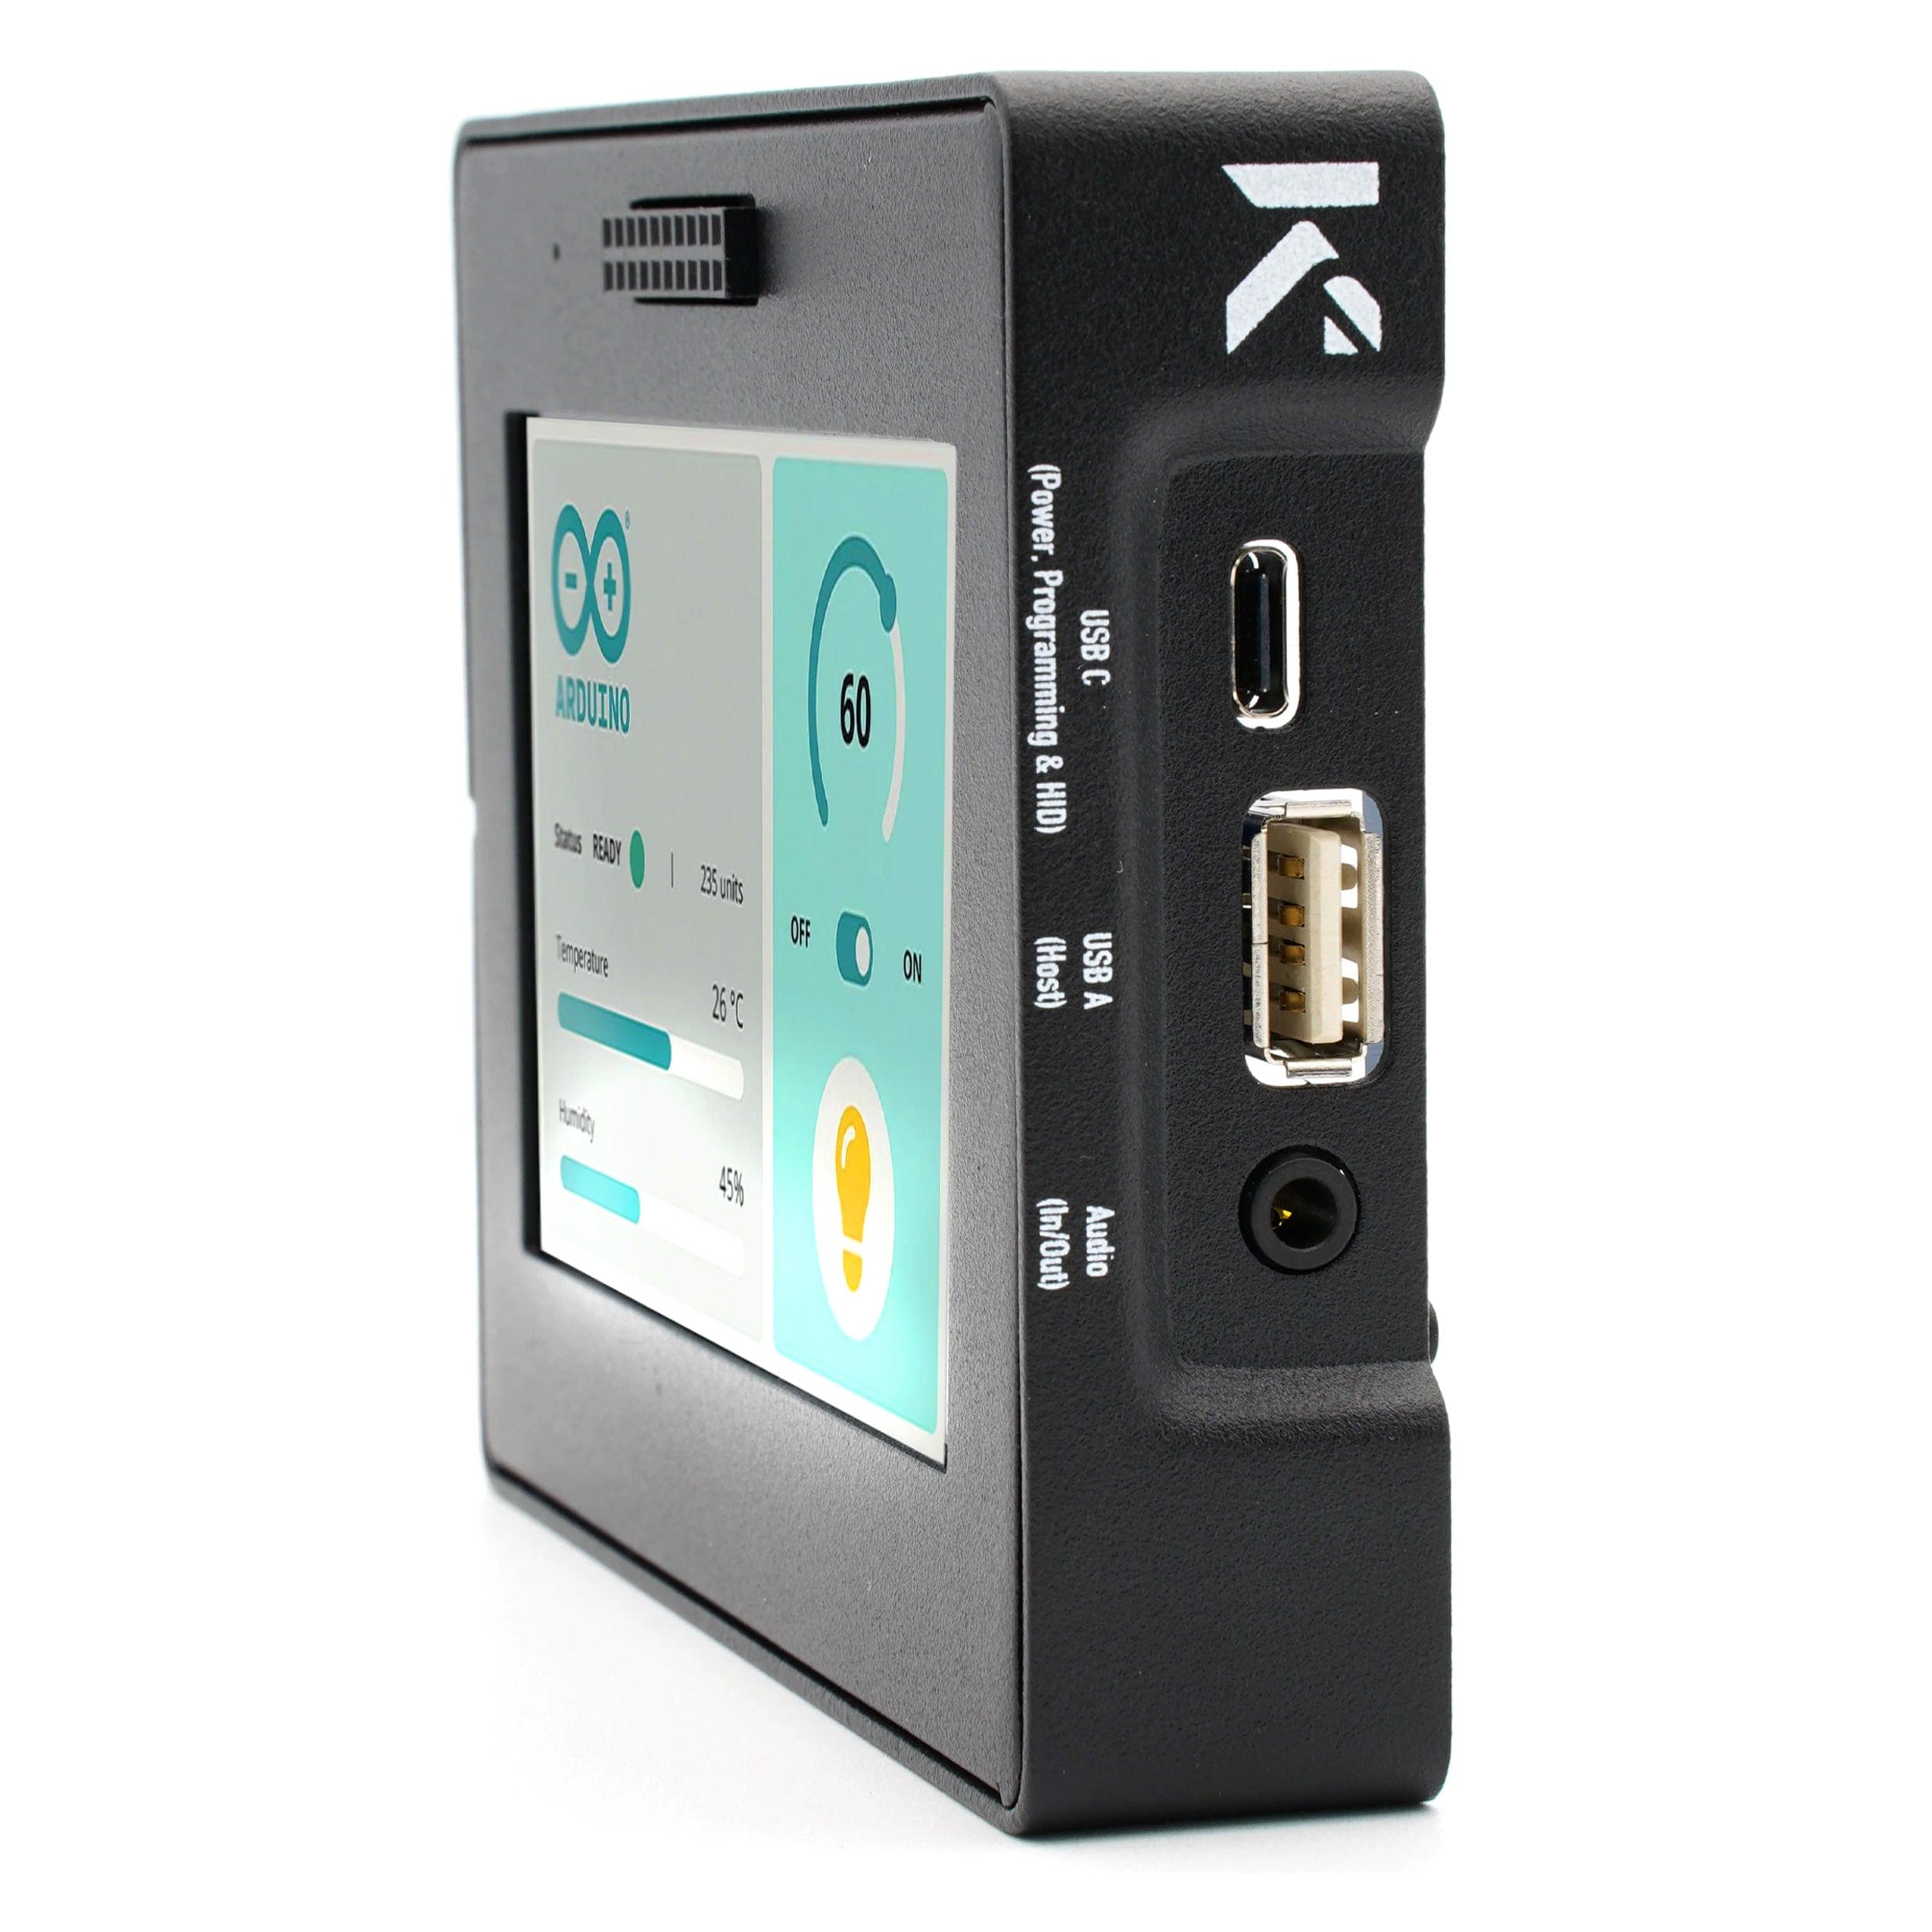 KKSB Case with Adjustable Stand for Arduino GIGA R1 WiFi and GIGA Display Shield - The Pi Hut